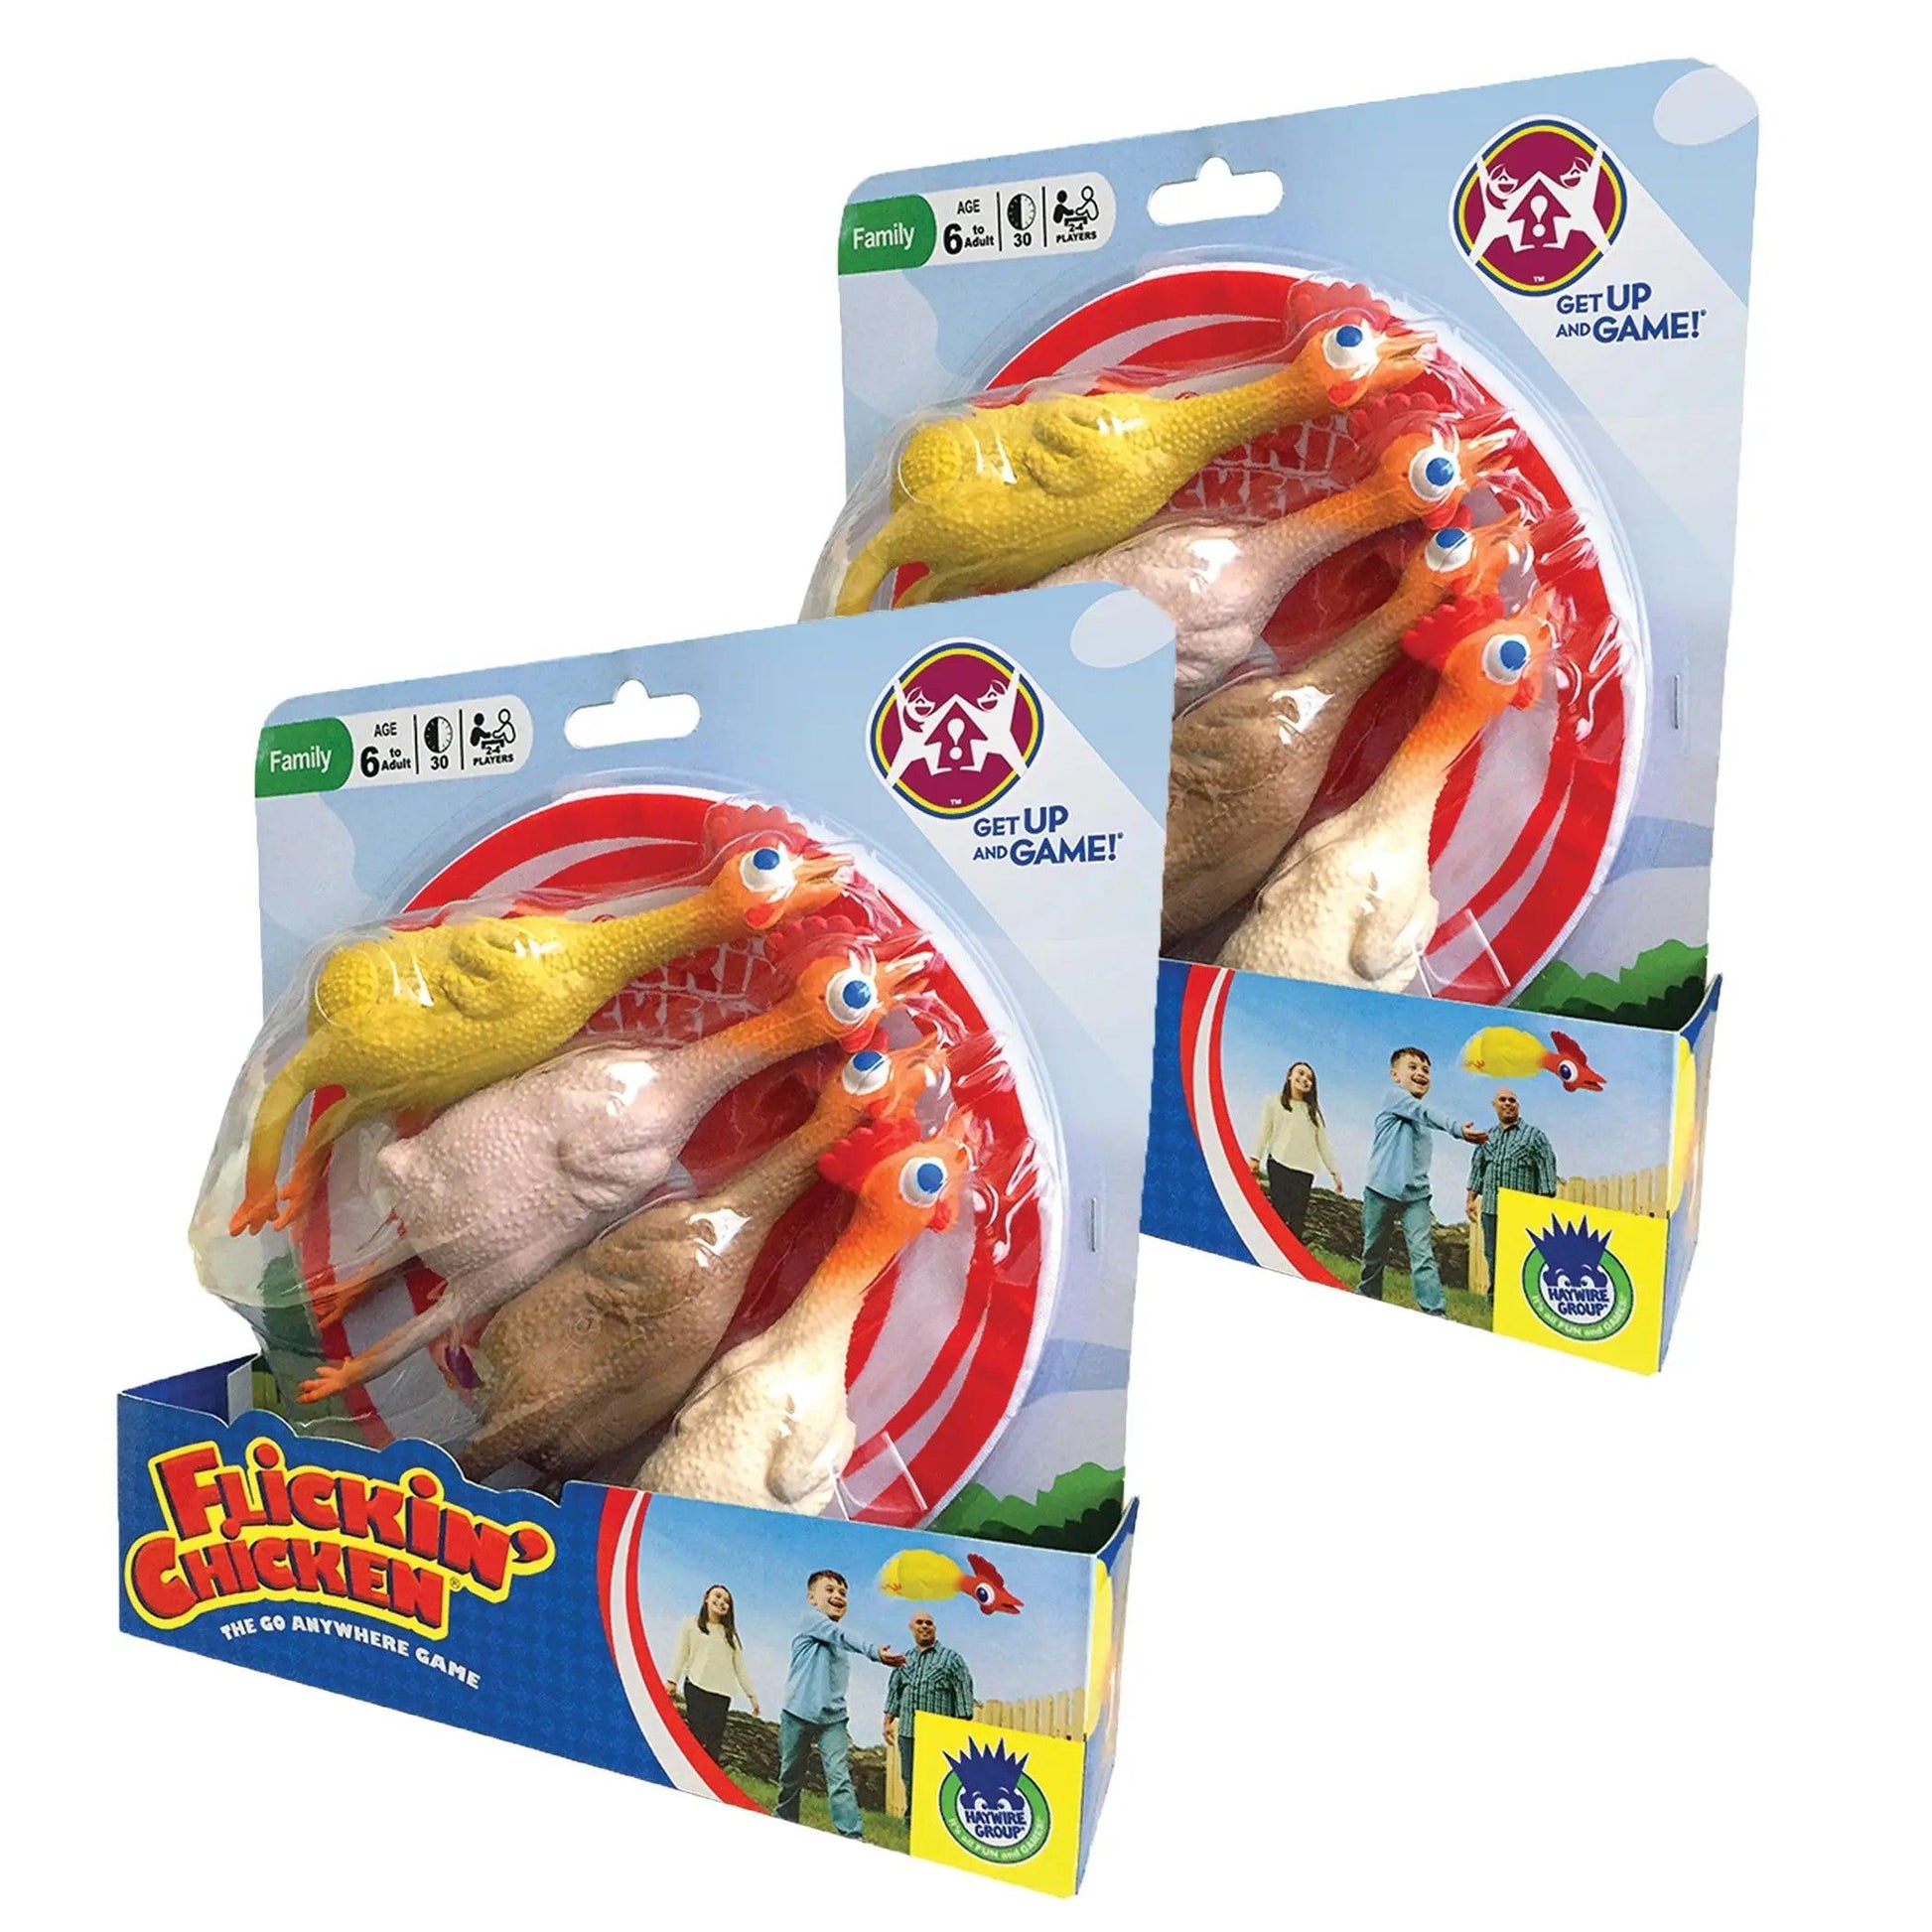 Flickin' Chicken Outdoor Game Set: Pack of 2 Enhances Hand-Eye Coordination | For Ages 6 and Up University Games